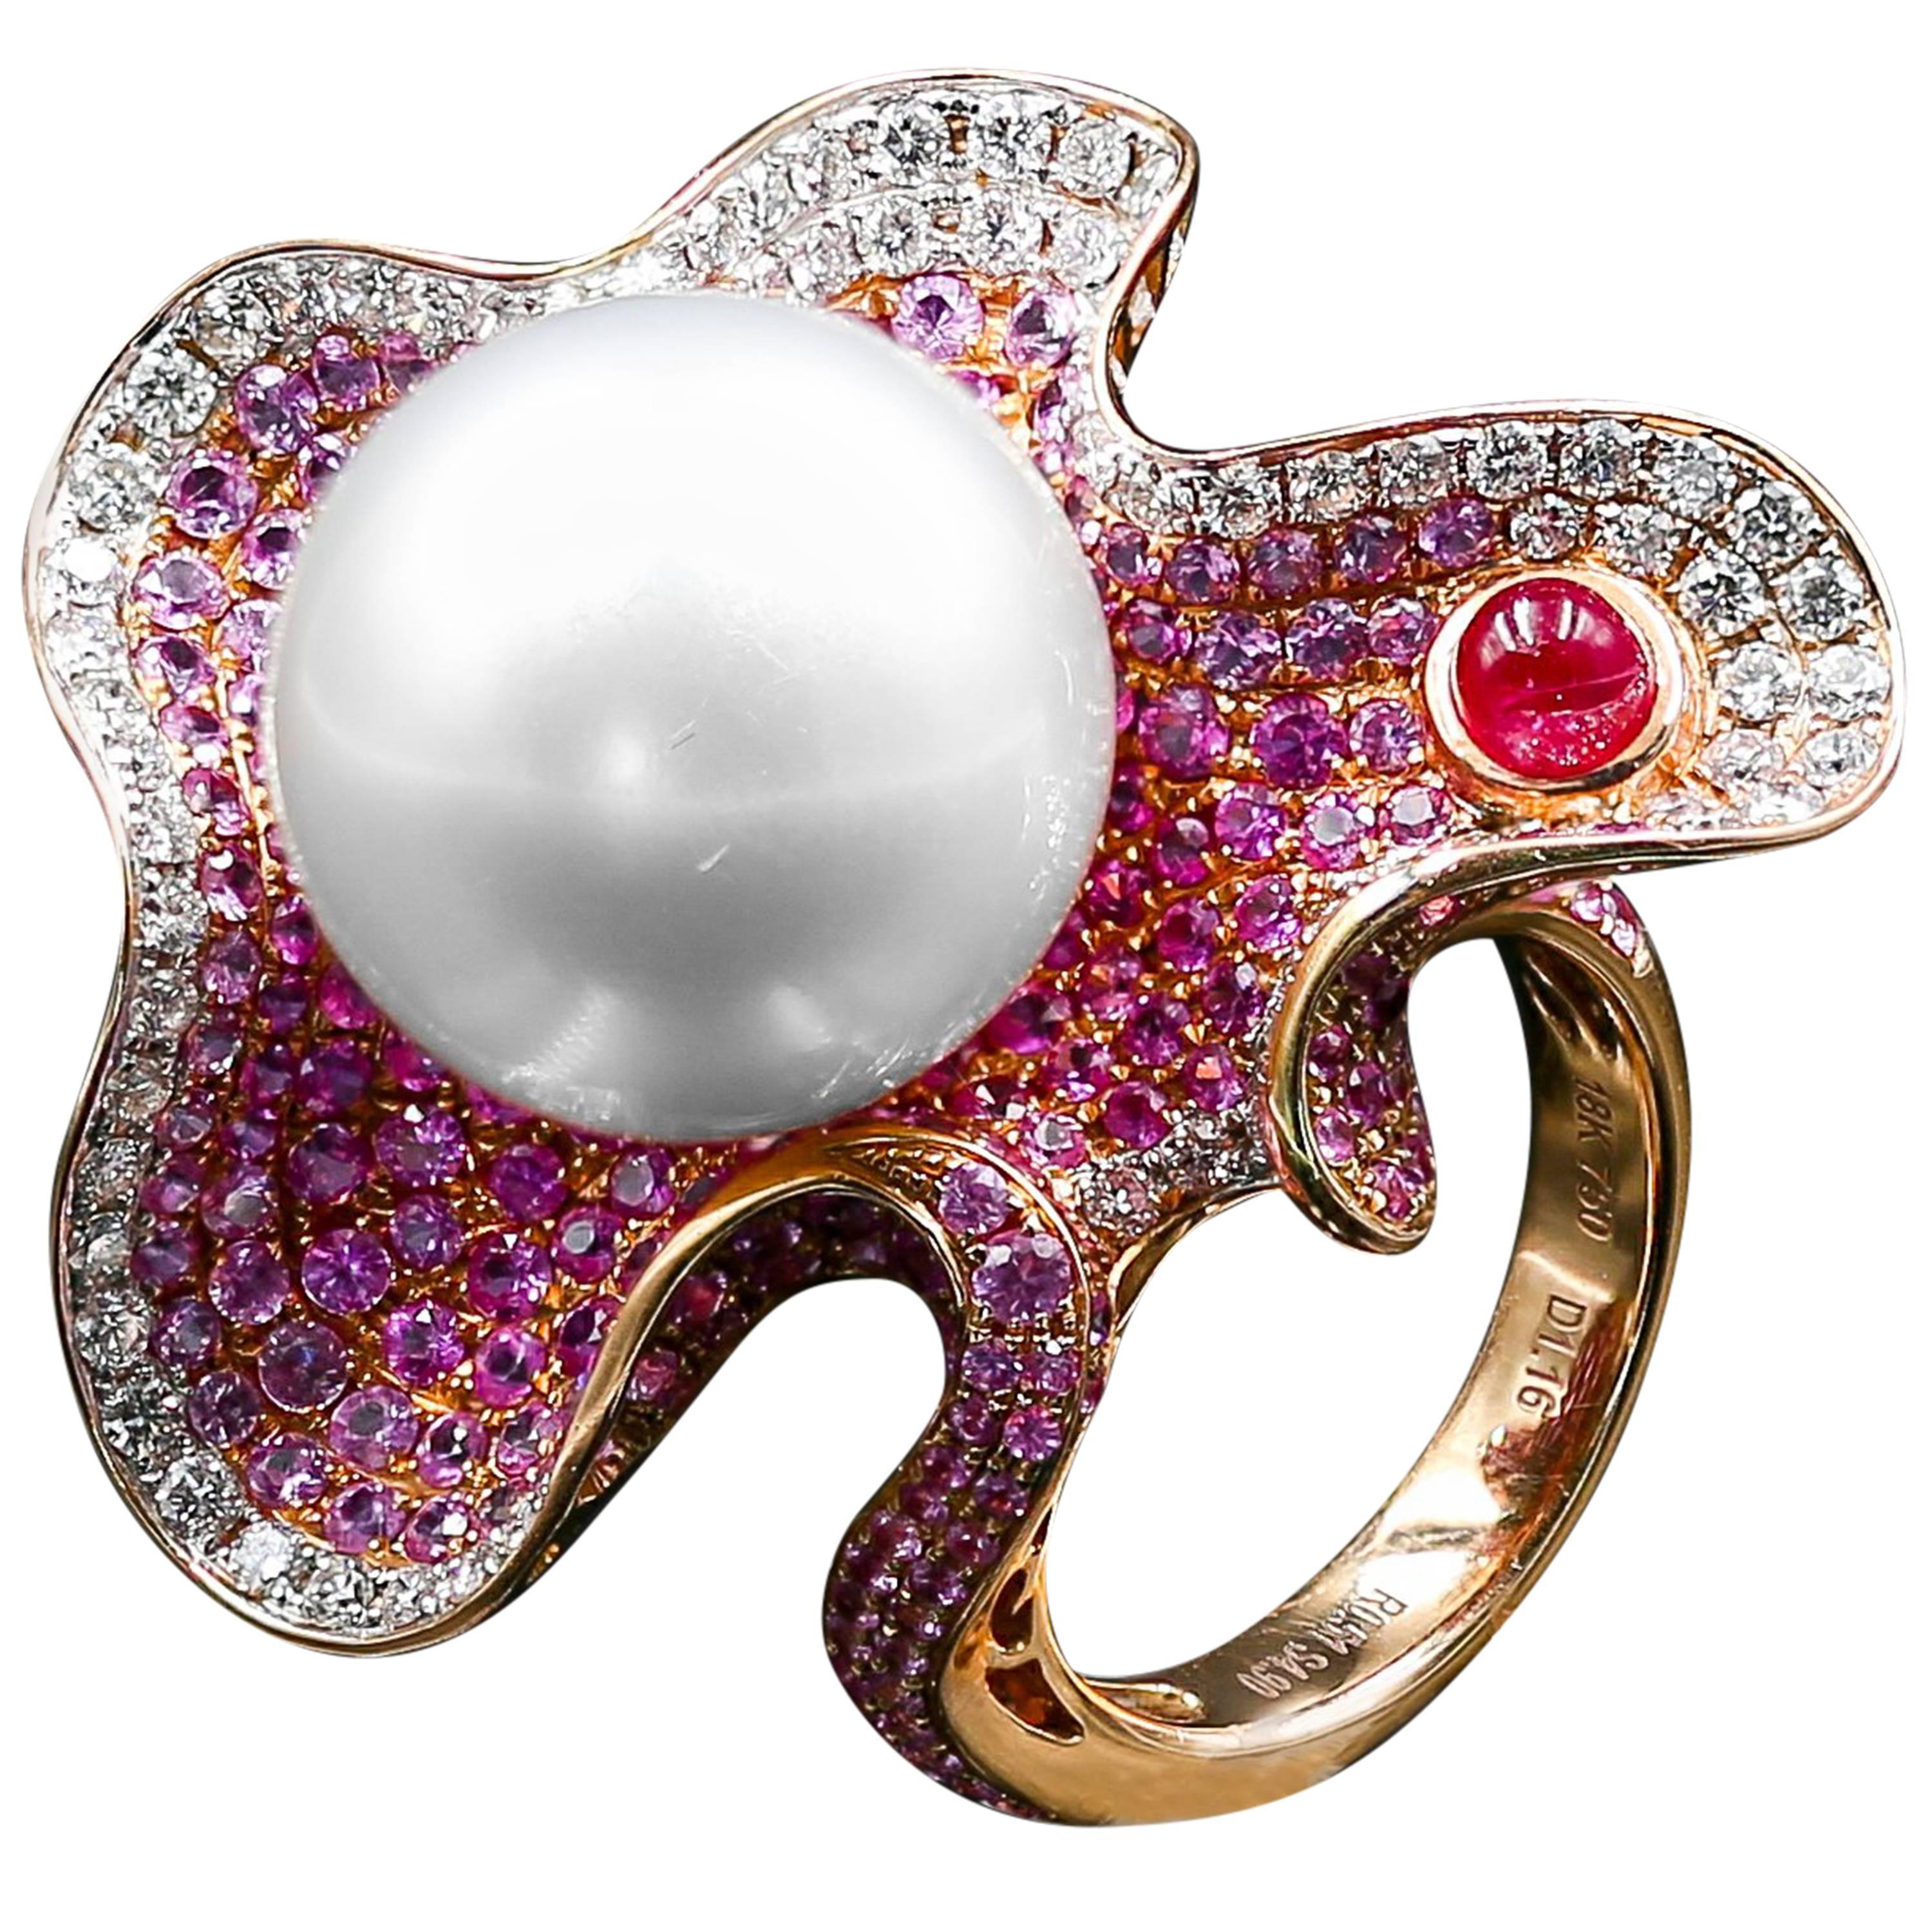 South Sea Pearl, Diamond, Sapphire, and Rubelite 18 Karat Gold Cocktail Ring For Sale